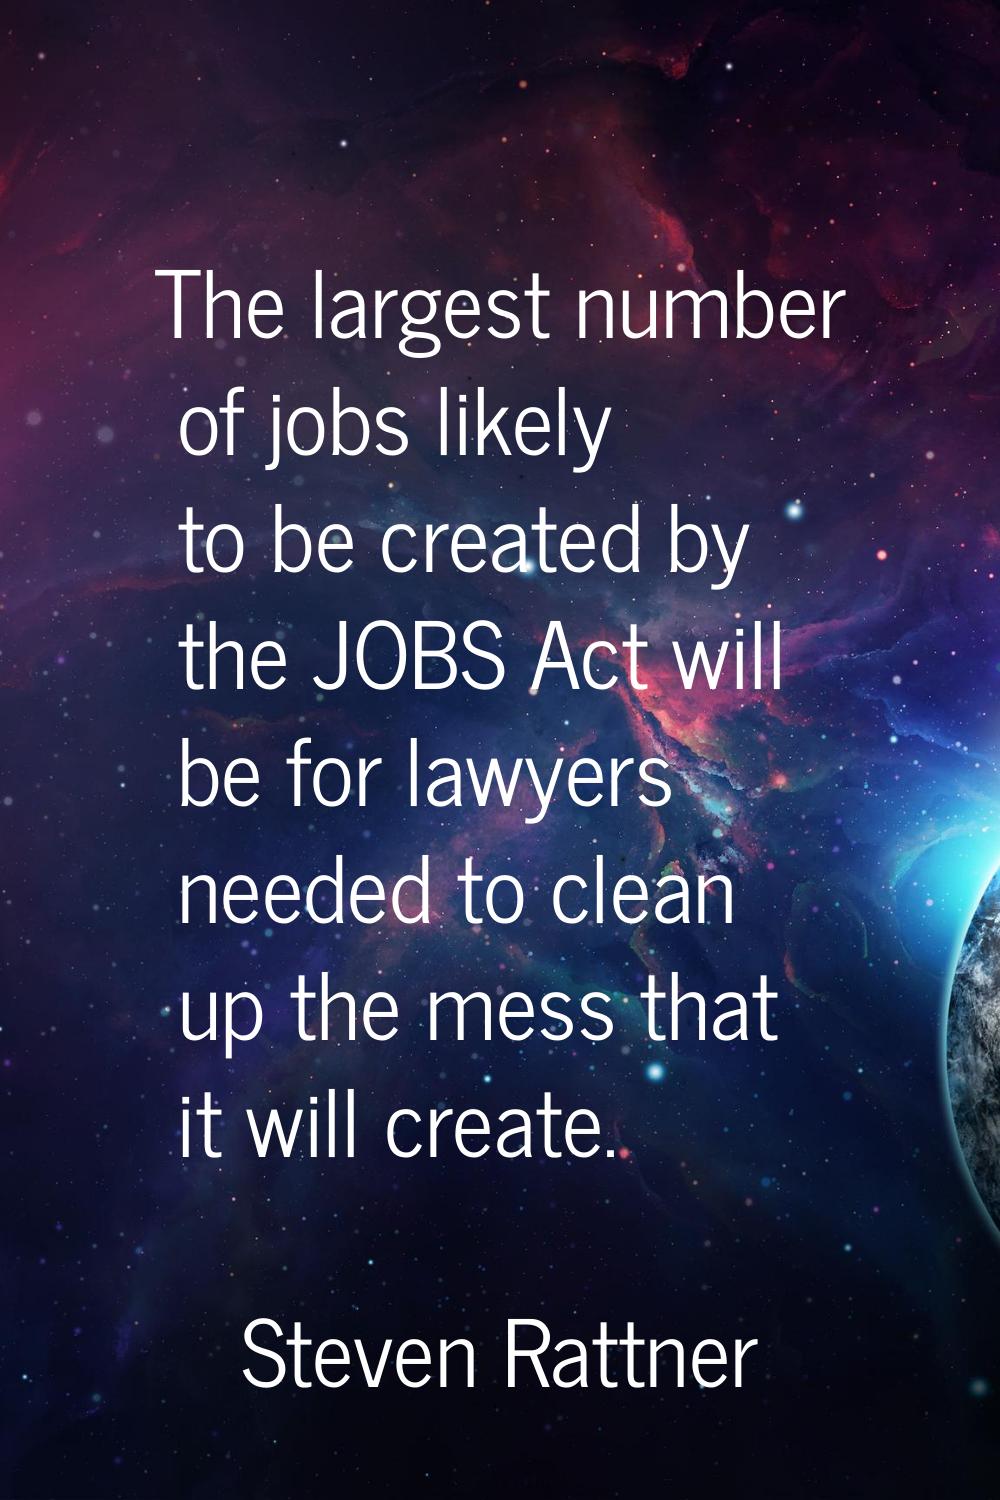 The largest number of jobs likely to be created by the JOBS Act will be for lawyers needed to clean